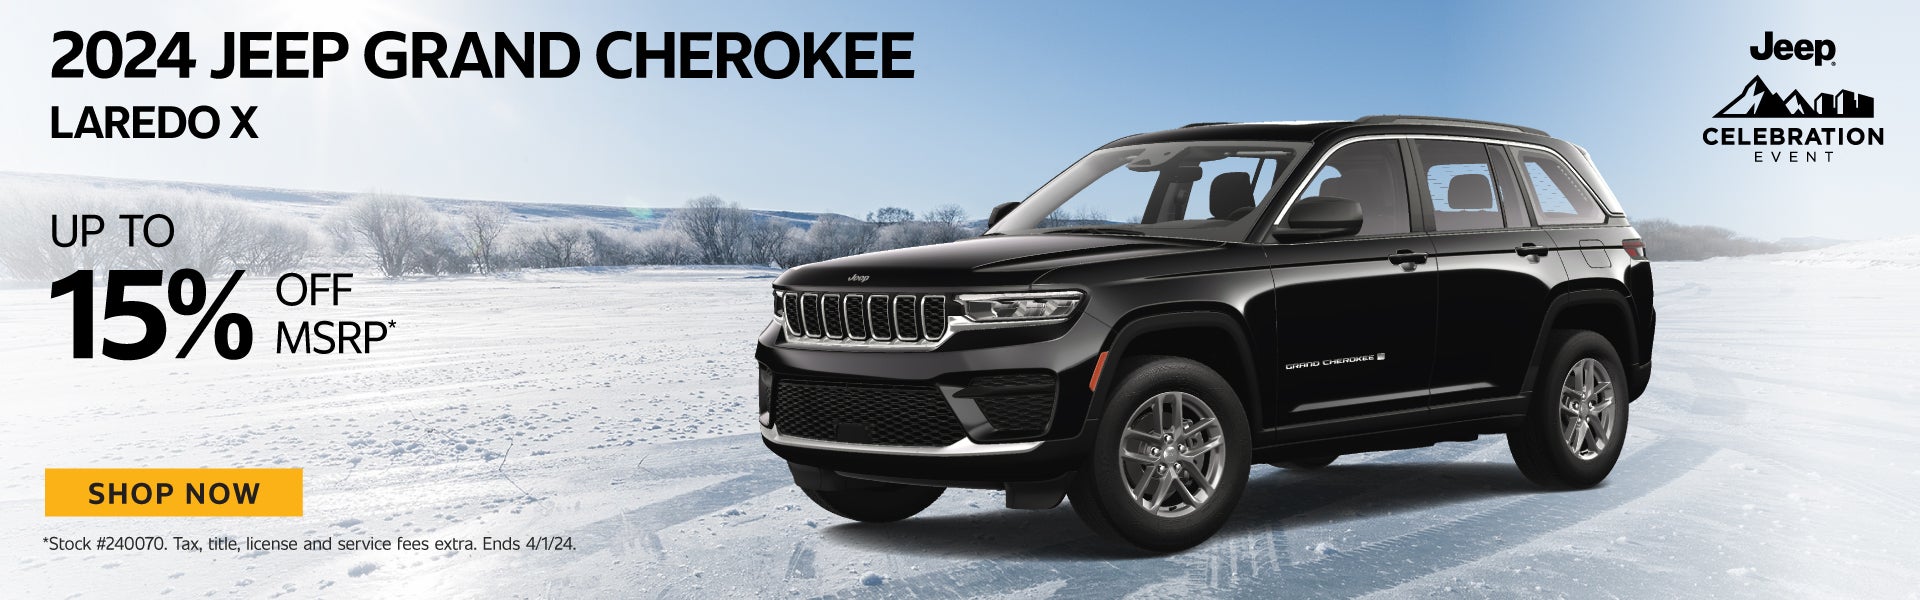 2024 Jeep Grand Cherokee Laredo X up to 15% off MSRP